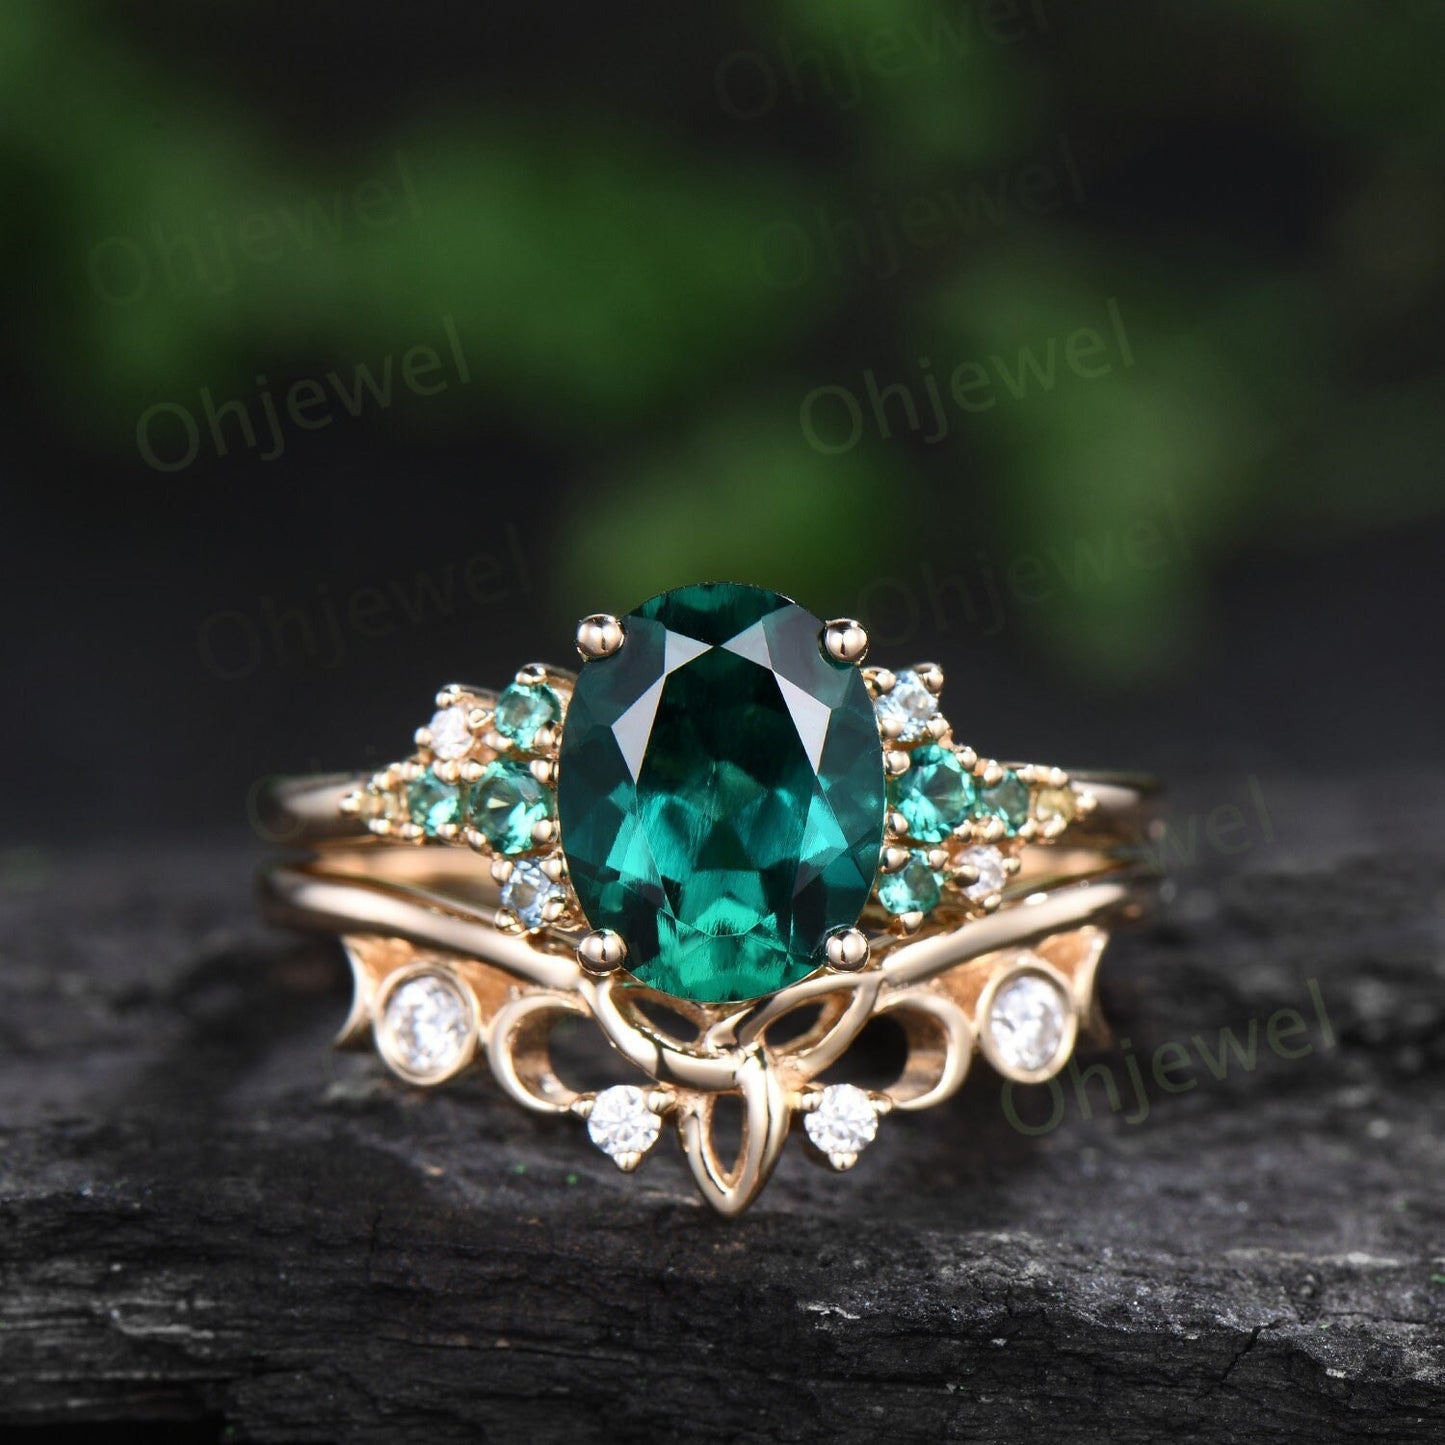 Vintage oval cut emerald engagement ring set solid 14k rose gold cluster snowdrift peridot topaz ring women gemstone ring unique bridal ring